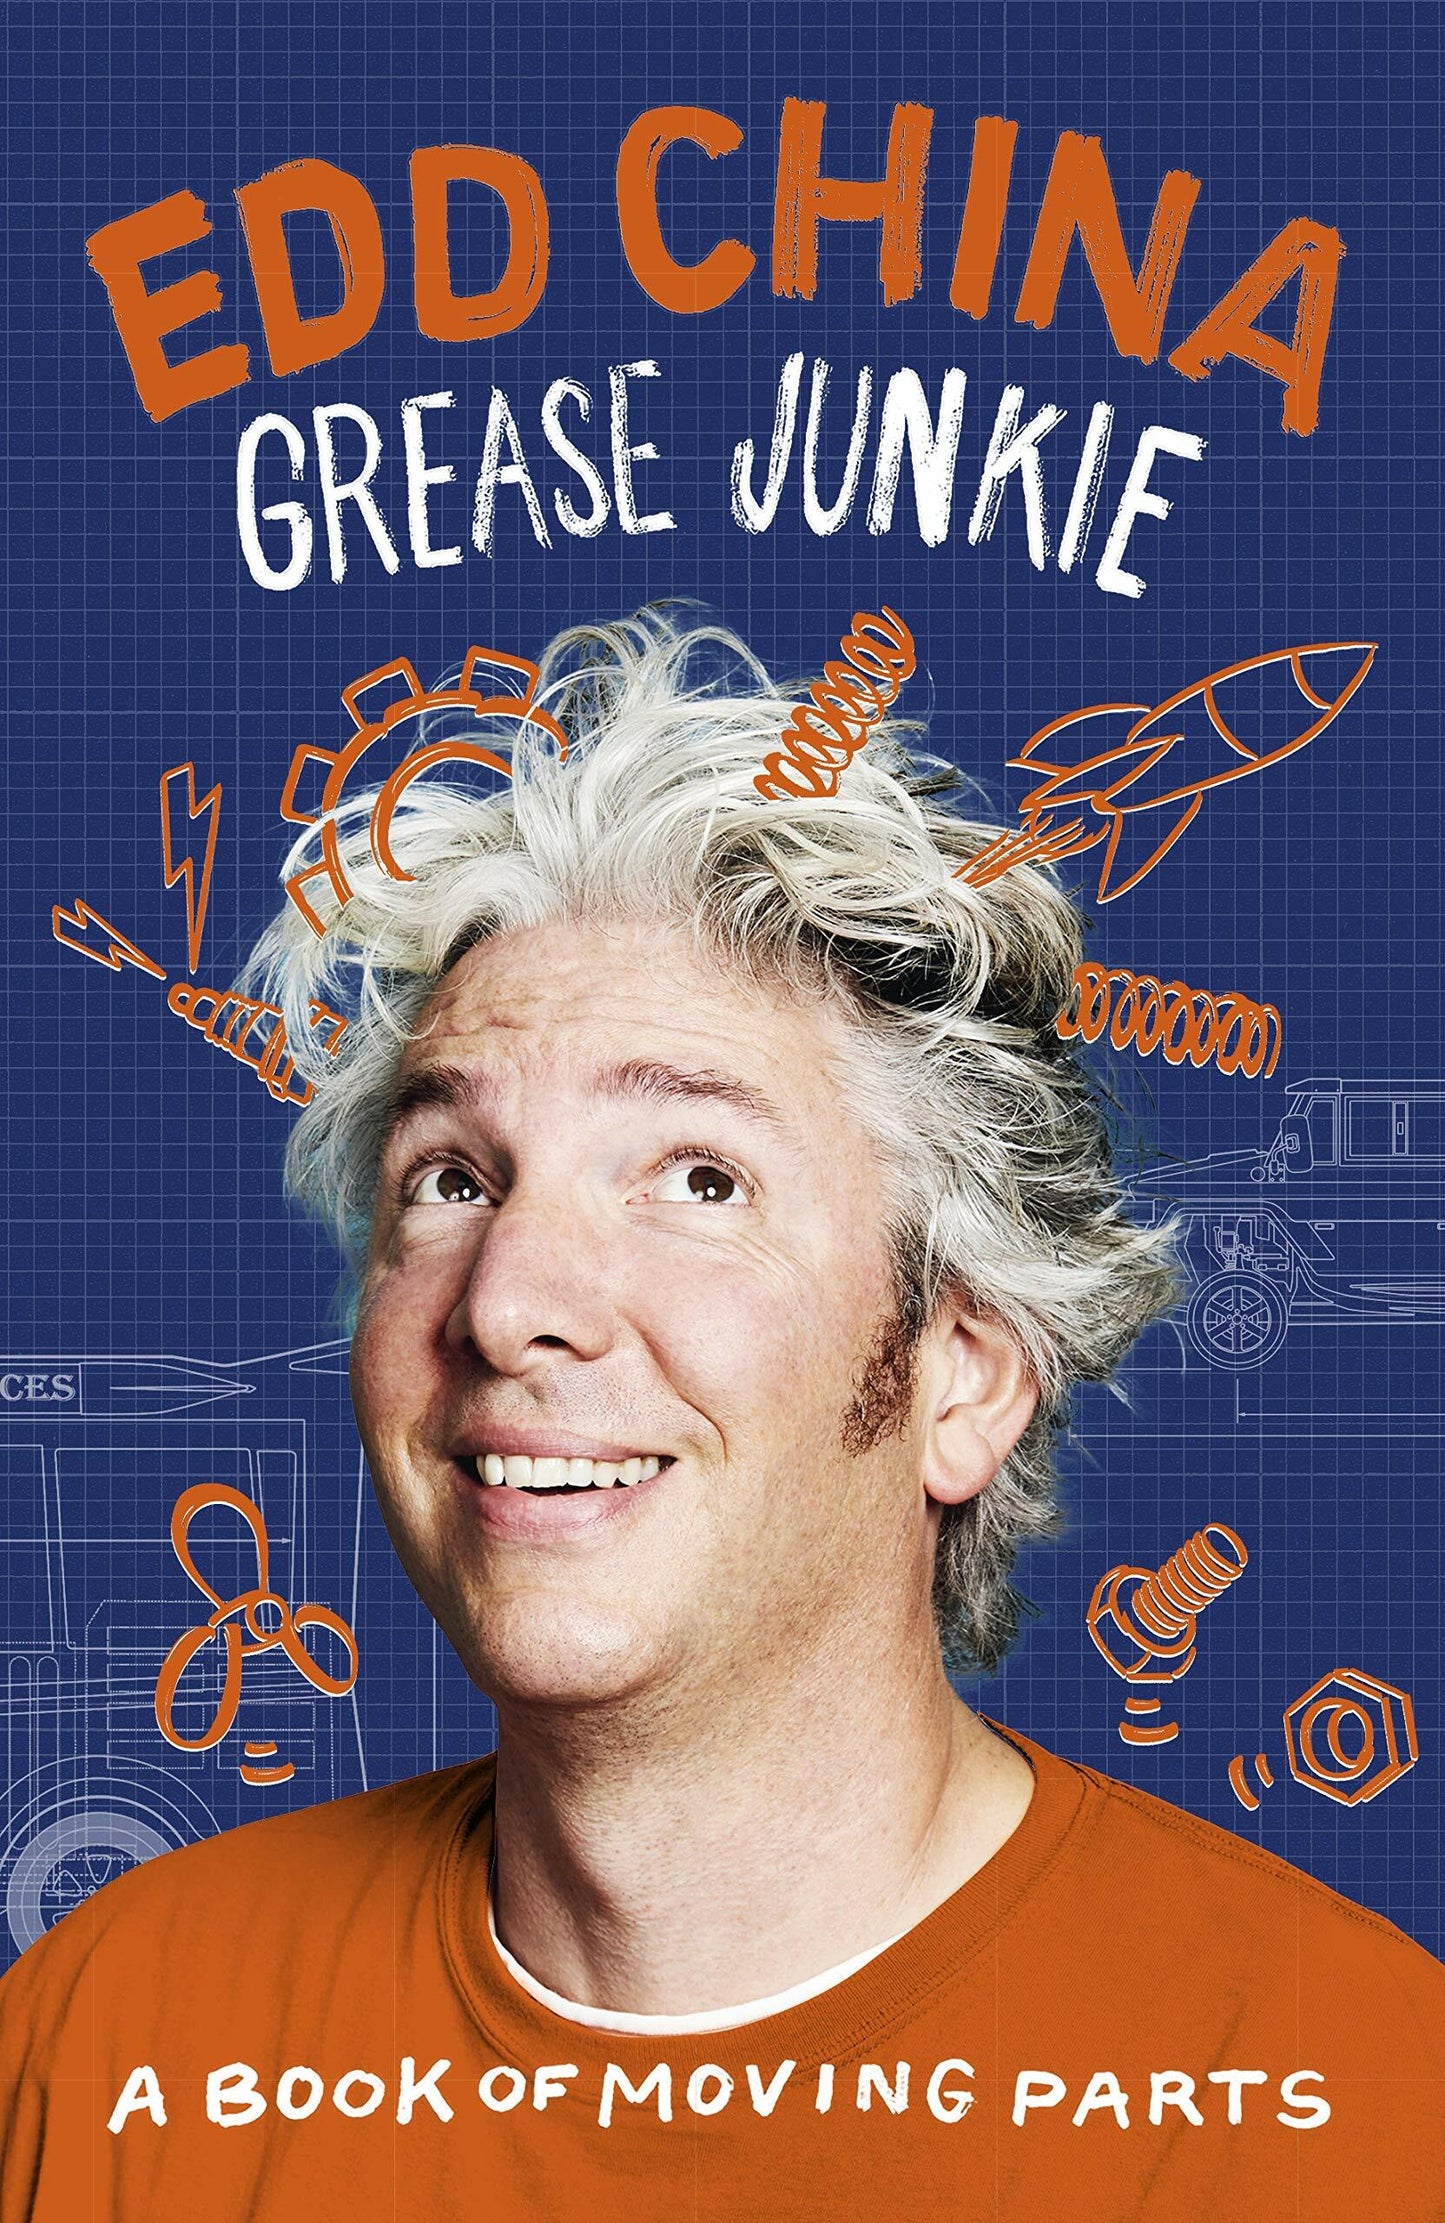 Grease Junkie: A book of moving parts, by Edd China - Hardcover Signed by Edd